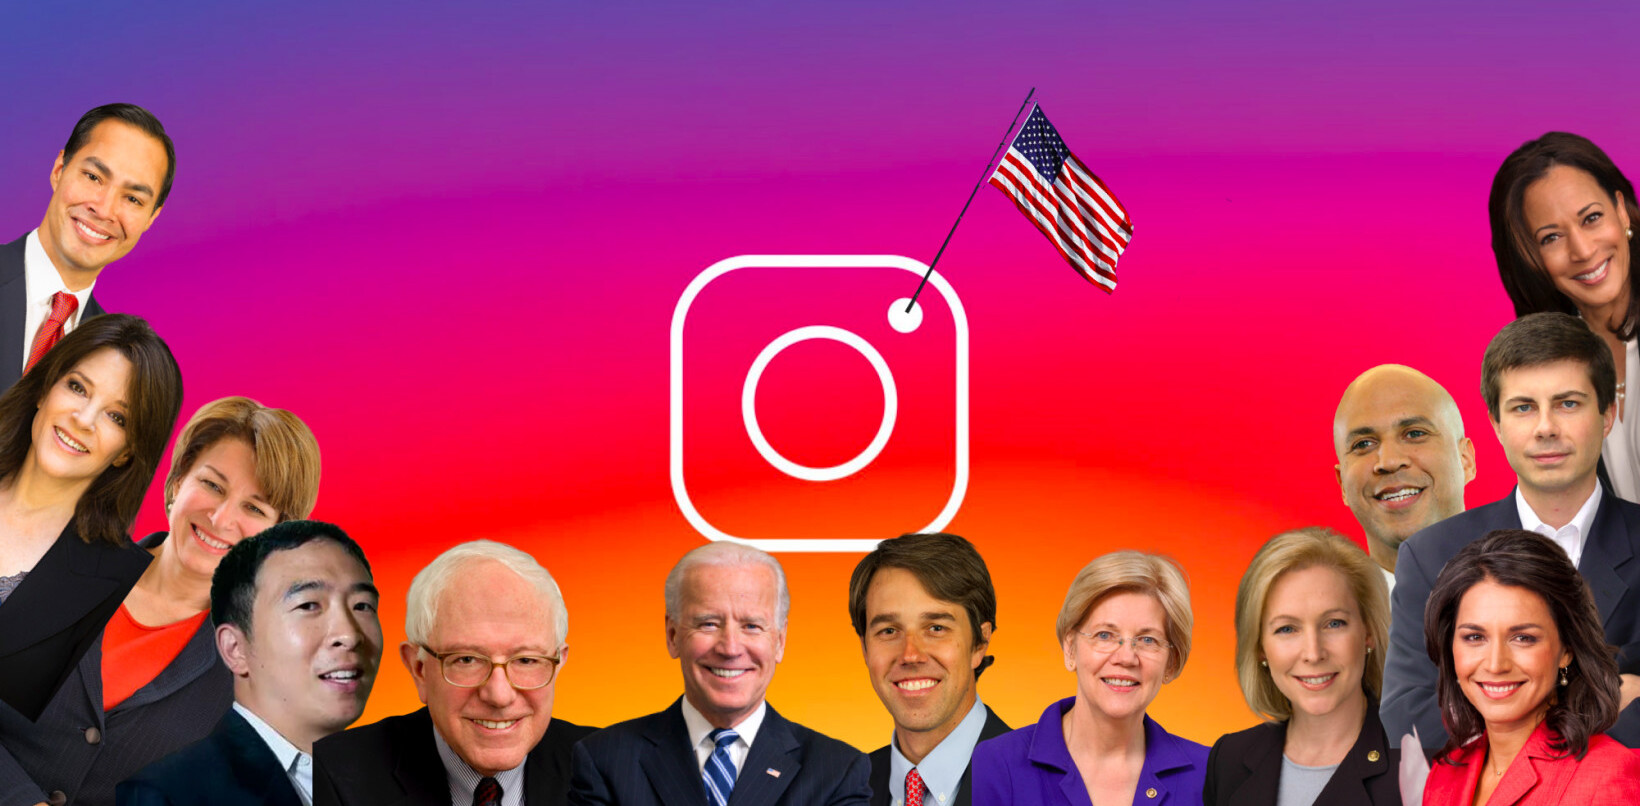 10 things we learned from the Democratic candidates’ Instagrams